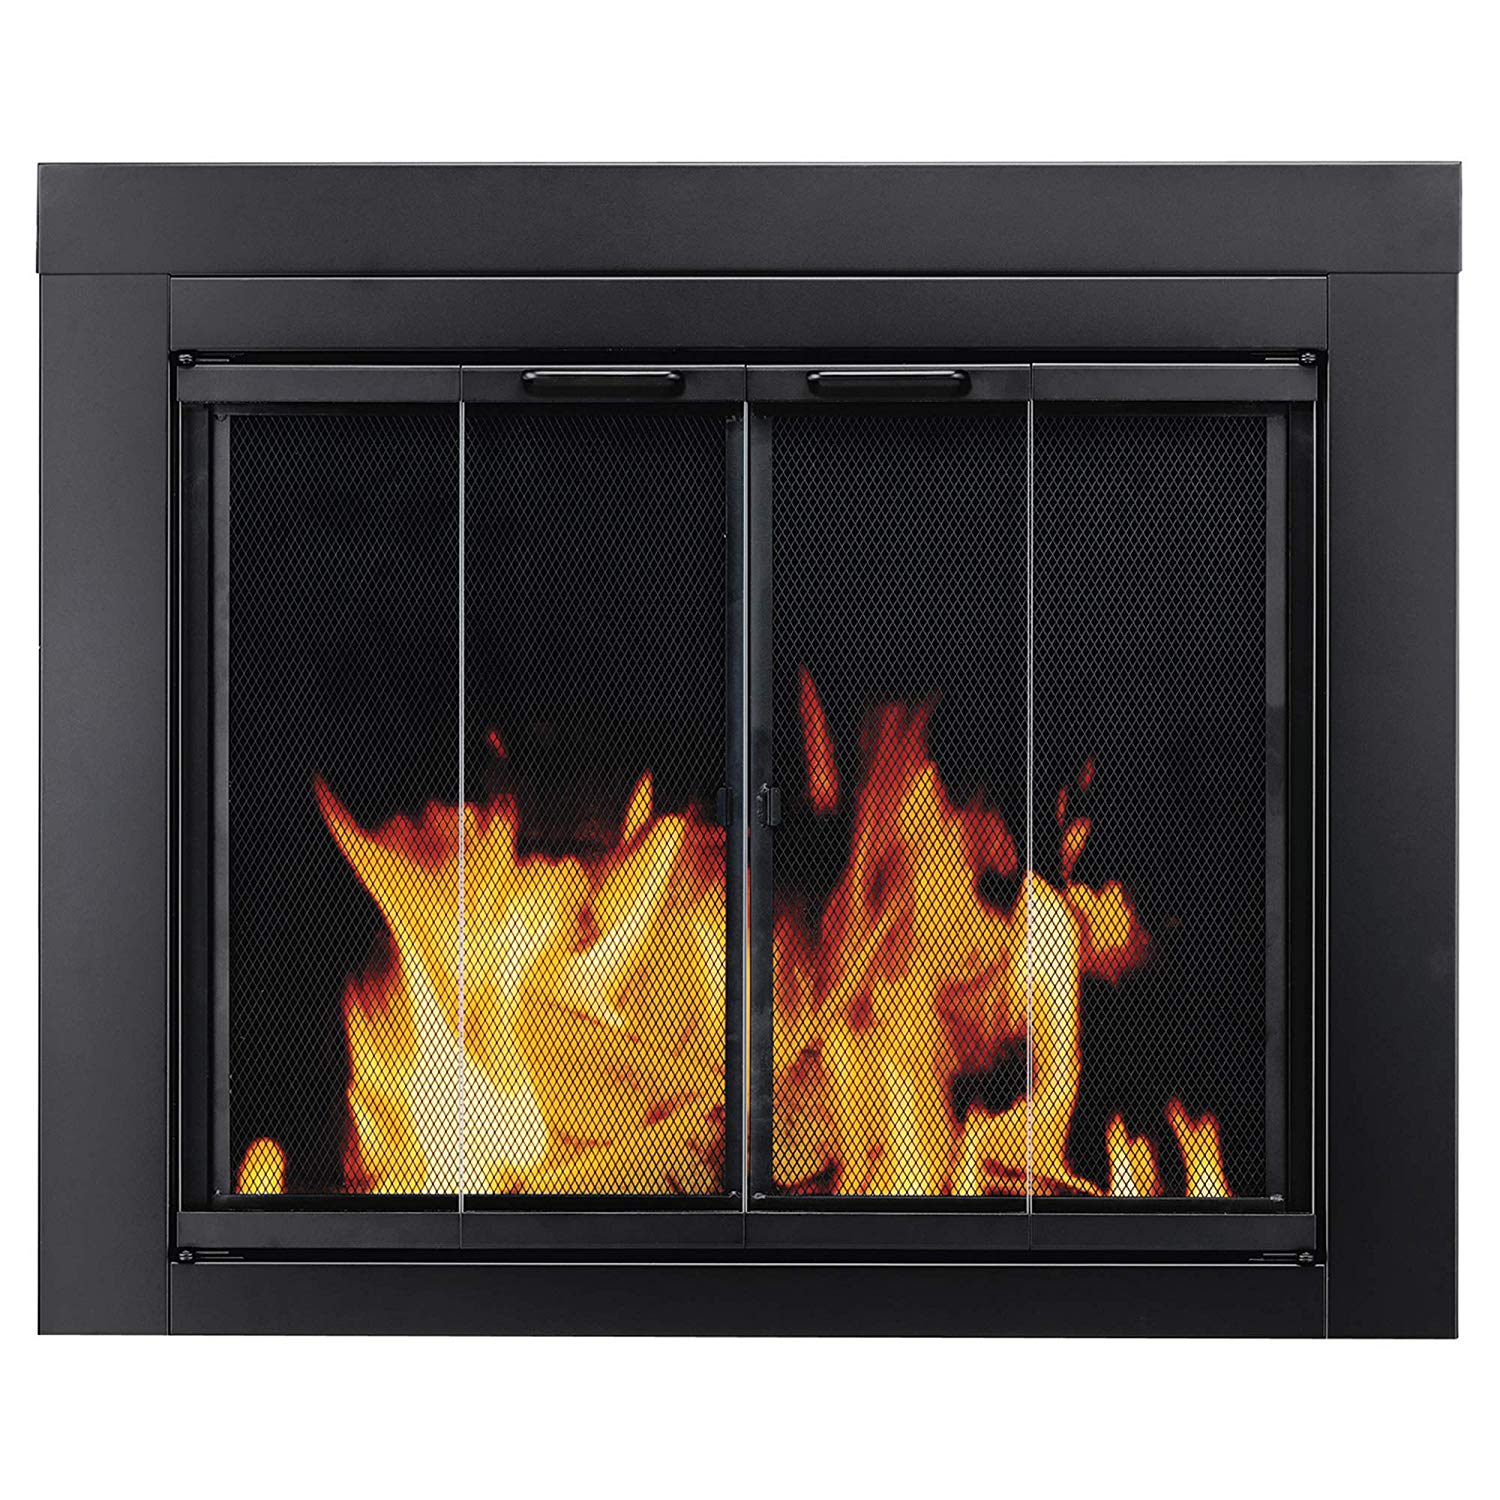 Fireplace with Speakers Beautiful Pleasant Hearth at 1000 ascot Fireplace Glass Door Black Small